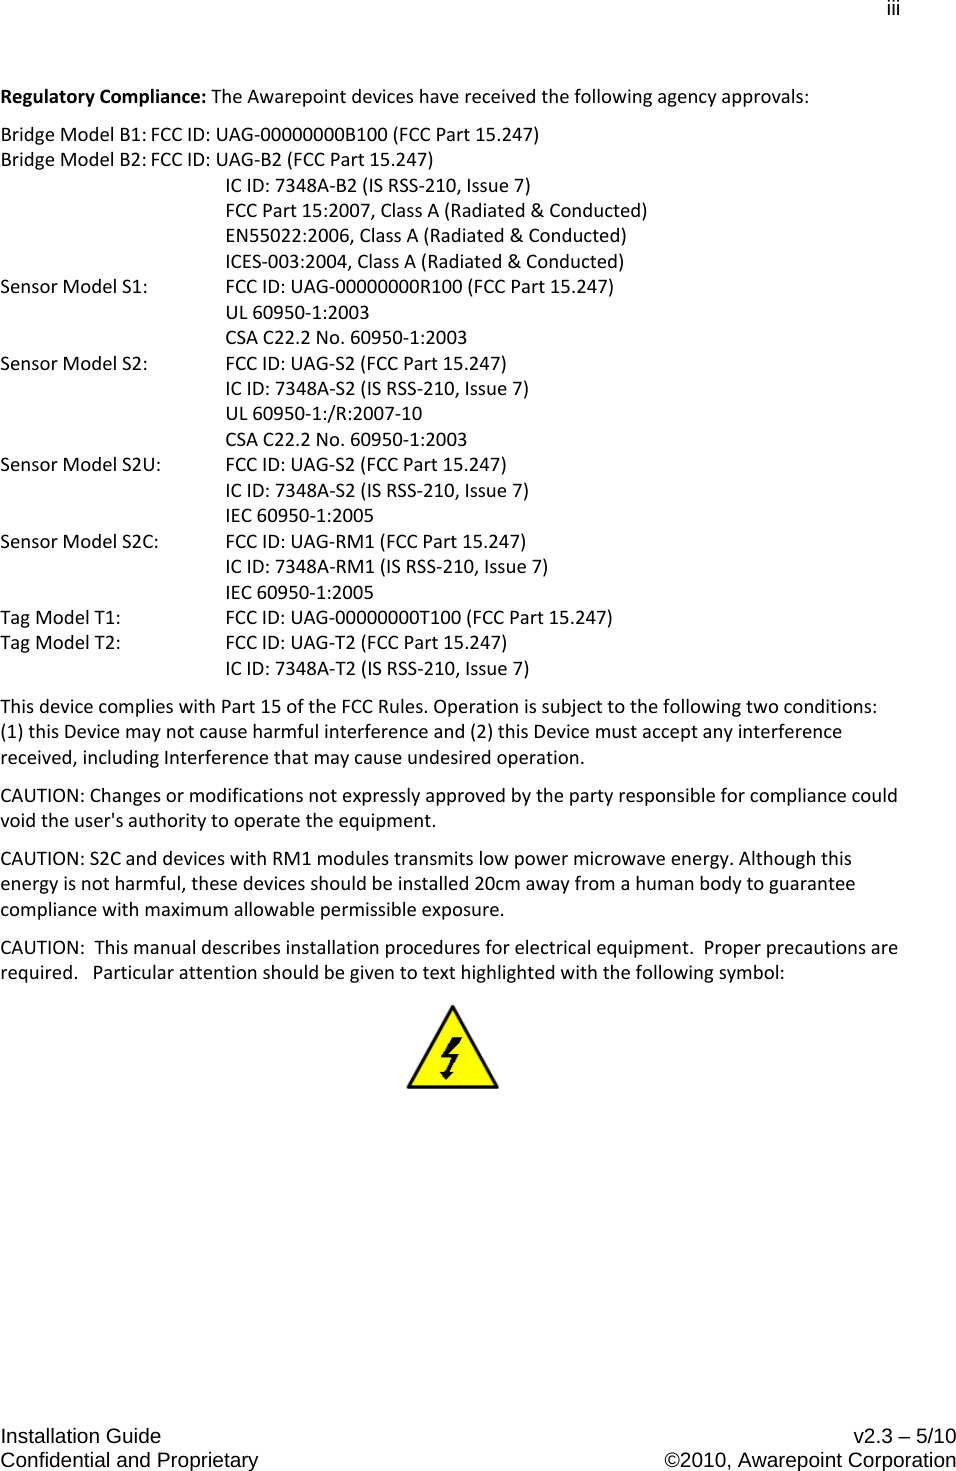 iii  Installation Guide    v2.3 – 5/10 Confidential and Proprietary    ©2010, Awarepoint Corporation  Regulatory Compliance: The Awarepoint devices have received the following agency approvals: Bridge Model B1: FCC ID: UAG-00000000B100 (FCC Part 15.247) Bridge Model B2: FCC ID: UAG-B2 (FCC Part 15.247)  IC ID: 7348A-B2 (IS RSS-210, Issue 7)  FCC Part 15:2007, Class A (Radiated &amp; Conducted)  EN55022:2006, Class A (Radiated &amp; Conducted)   ICES-003:2004, Class A (Radiated &amp; Conducted) Sensor Model S1: FCC ID: UAG-00000000R100 (FCC Part 15.247)  UL 60950-1:2003  CSA C22.2 No. 60950-1:2003 Sensor Model S2: FCC ID: UAG-S2 (FCC Part 15.247)  IC ID: 7348A-S2 (IS RSS-210, Issue 7)  UL 60950-1:/R:2007-10  CSA C22.2 No. 60950-1:2003 Sensor Model S2U: FCC ID: UAG-S2 (FCC Part 15.247)  IC ID: 7348A-S2 (IS RSS-210, Issue 7)  IEC 60950-1:2005 Sensor Model S2C: FCC ID: UAG-RM1 (FCC Part 15.247)  IC ID: 7348A-RM1 (IS RSS-210, Issue 7)  IEC 60950-1:2005 Tag Model T1: FCC ID: UAG-00000000T100 (FCC Part 15.247) Tag Model T2: FCC ID: UAG-T2 (FCC Part 15.247)  IC ID: 7348A-T2 (IS RSS-210, Issue 7) This device complies with Part 15 of the FCC Rules. Operation is subject to the following two conditions: (1) this Device may not cause harmful interference and (2) this Device must accept any interference received, including Interference that may cause undesired operation. CAUTION: Changes or modifications not expressly approved by the party responsible for compliance could void the user&apos;s authority to operate the equipment. CAUTION: S2C and devices with RM1 modules transmits low power microwave energy. Although this energy is not harmful, these devices should be installed 20cm away from a human body to guarantee compliance with maximum allowable permissible exposure.  CAUTION:  This manual describes installation procedures for electrical equipment.  Proper precautions are required.   Particular attention should be given to text highlighted with the following symbol:   